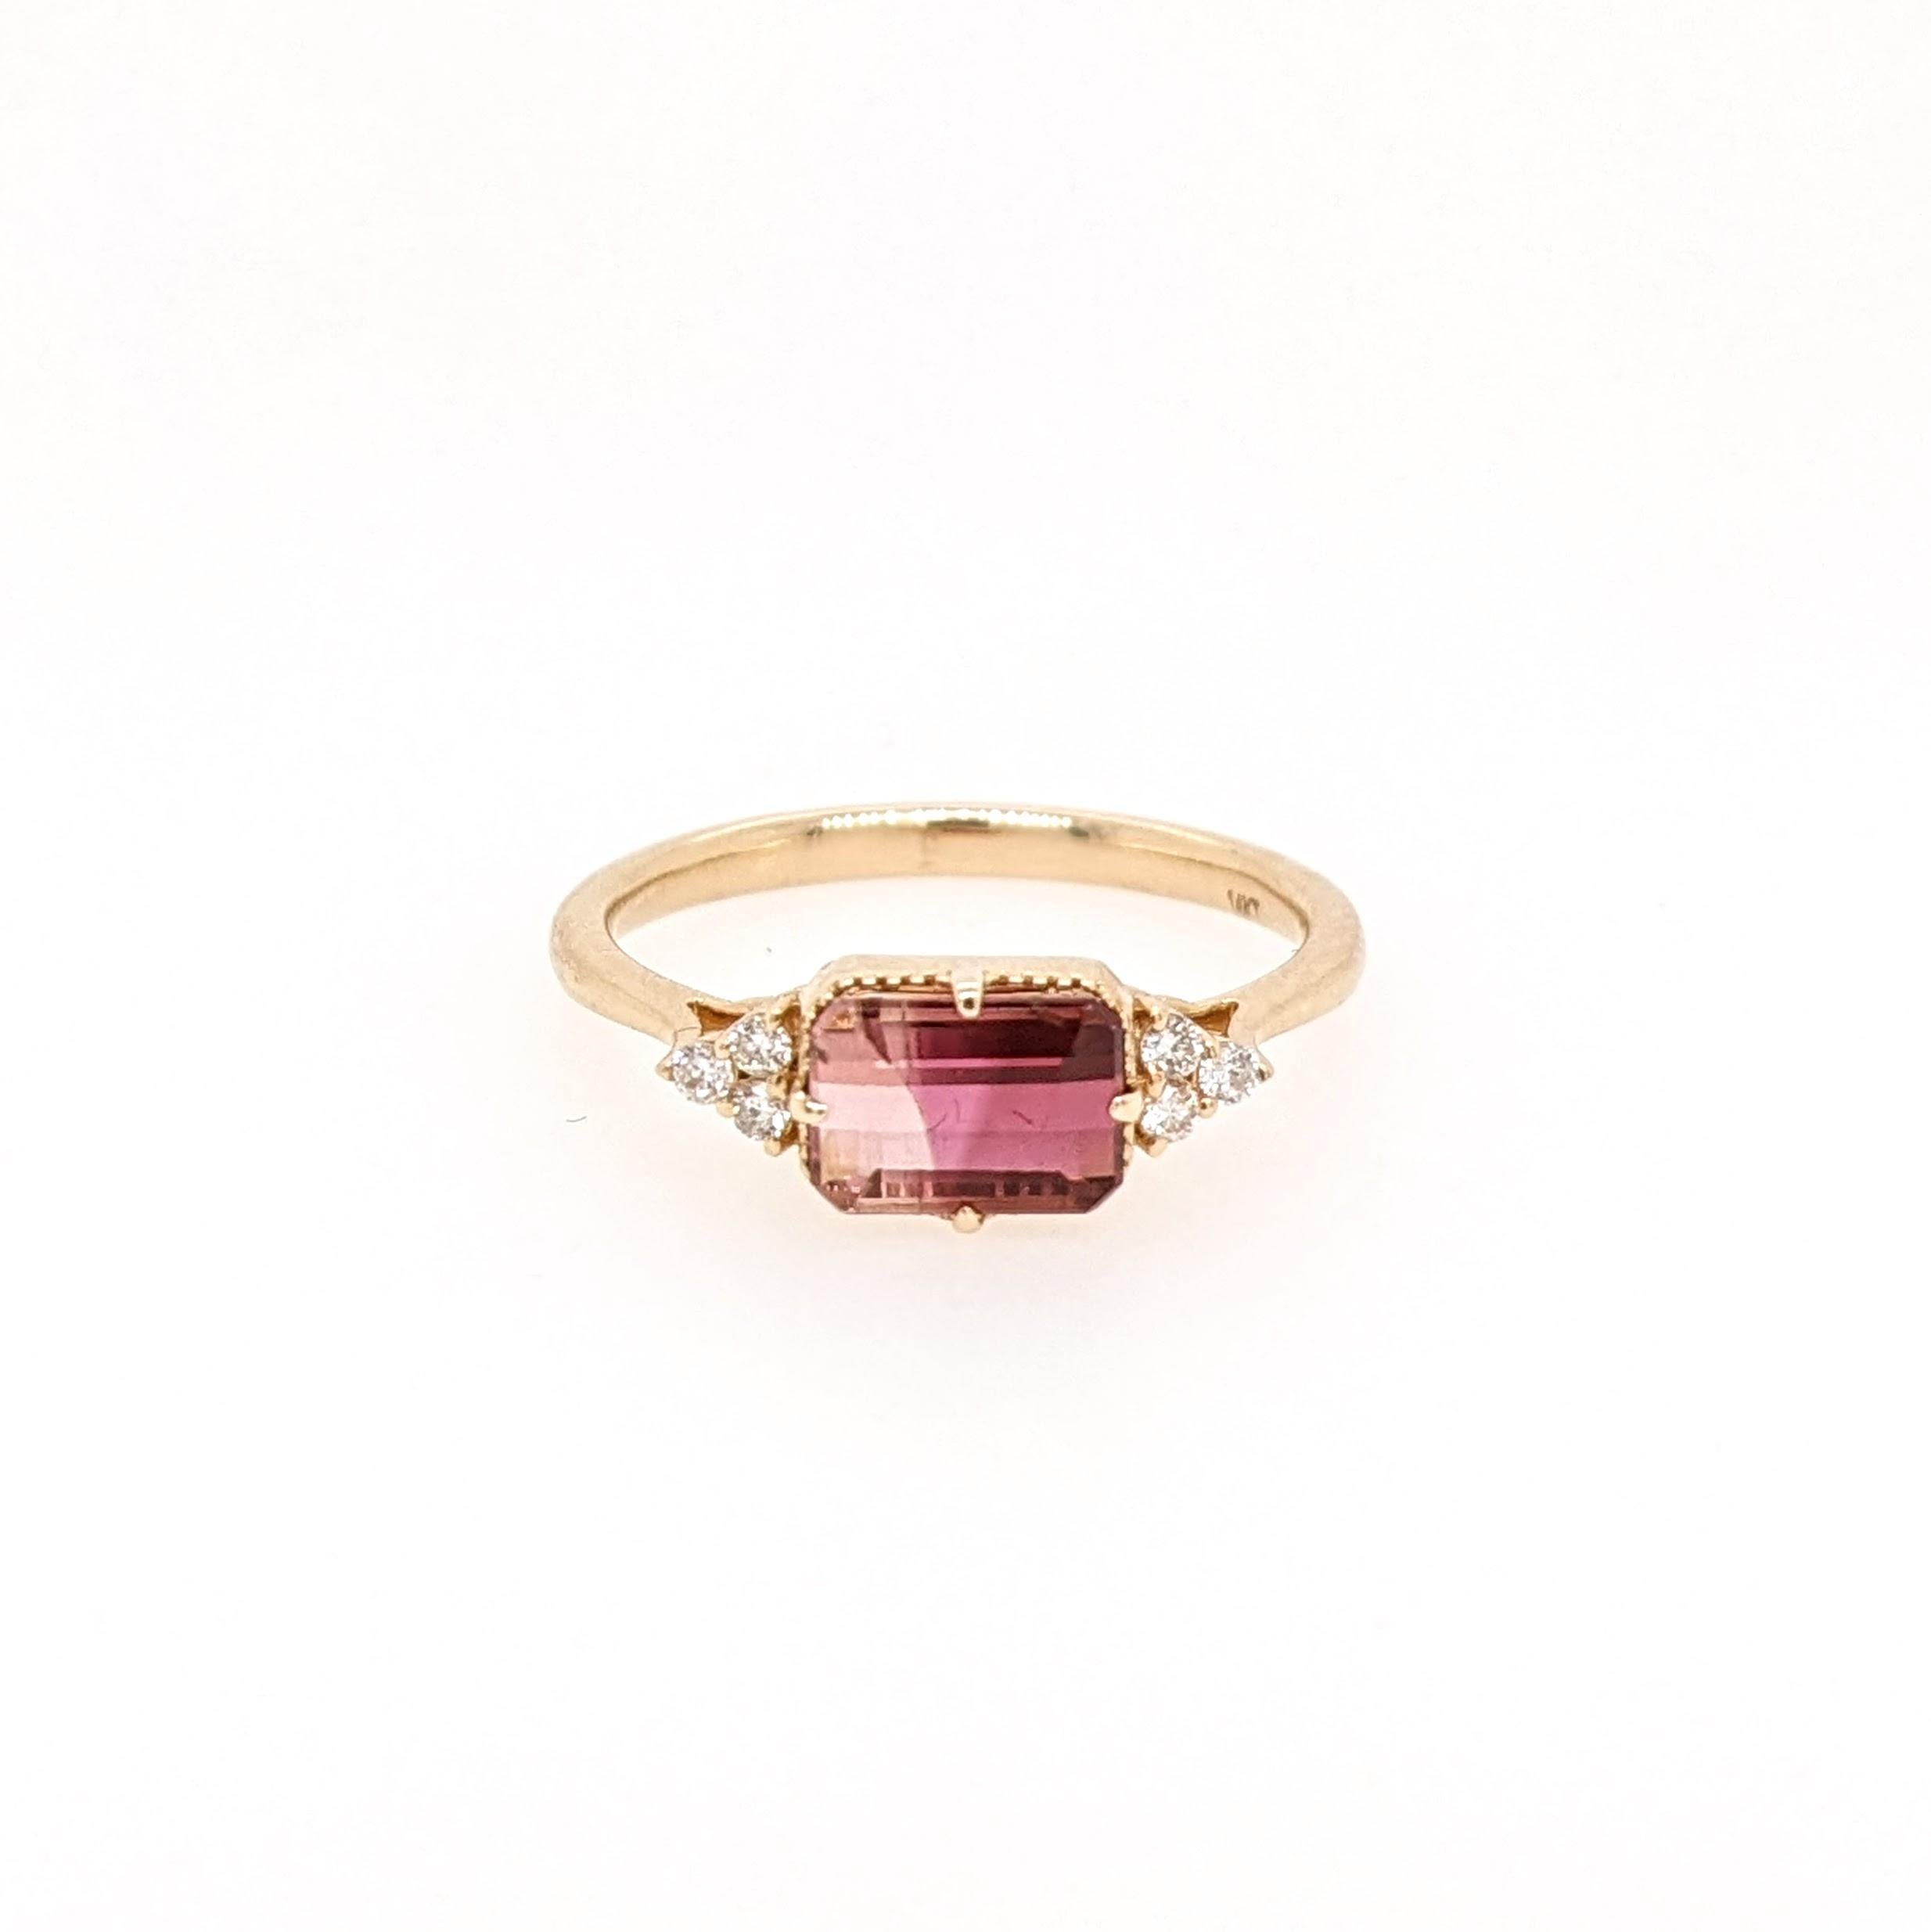 This ring features a beautiful bi-color tourmaline in a classic NNJ Designs ring setting with sparkling natural diamonds all set in 14k yellow gold. A gorgeous modern look that's perfectly balanced between minimalist and